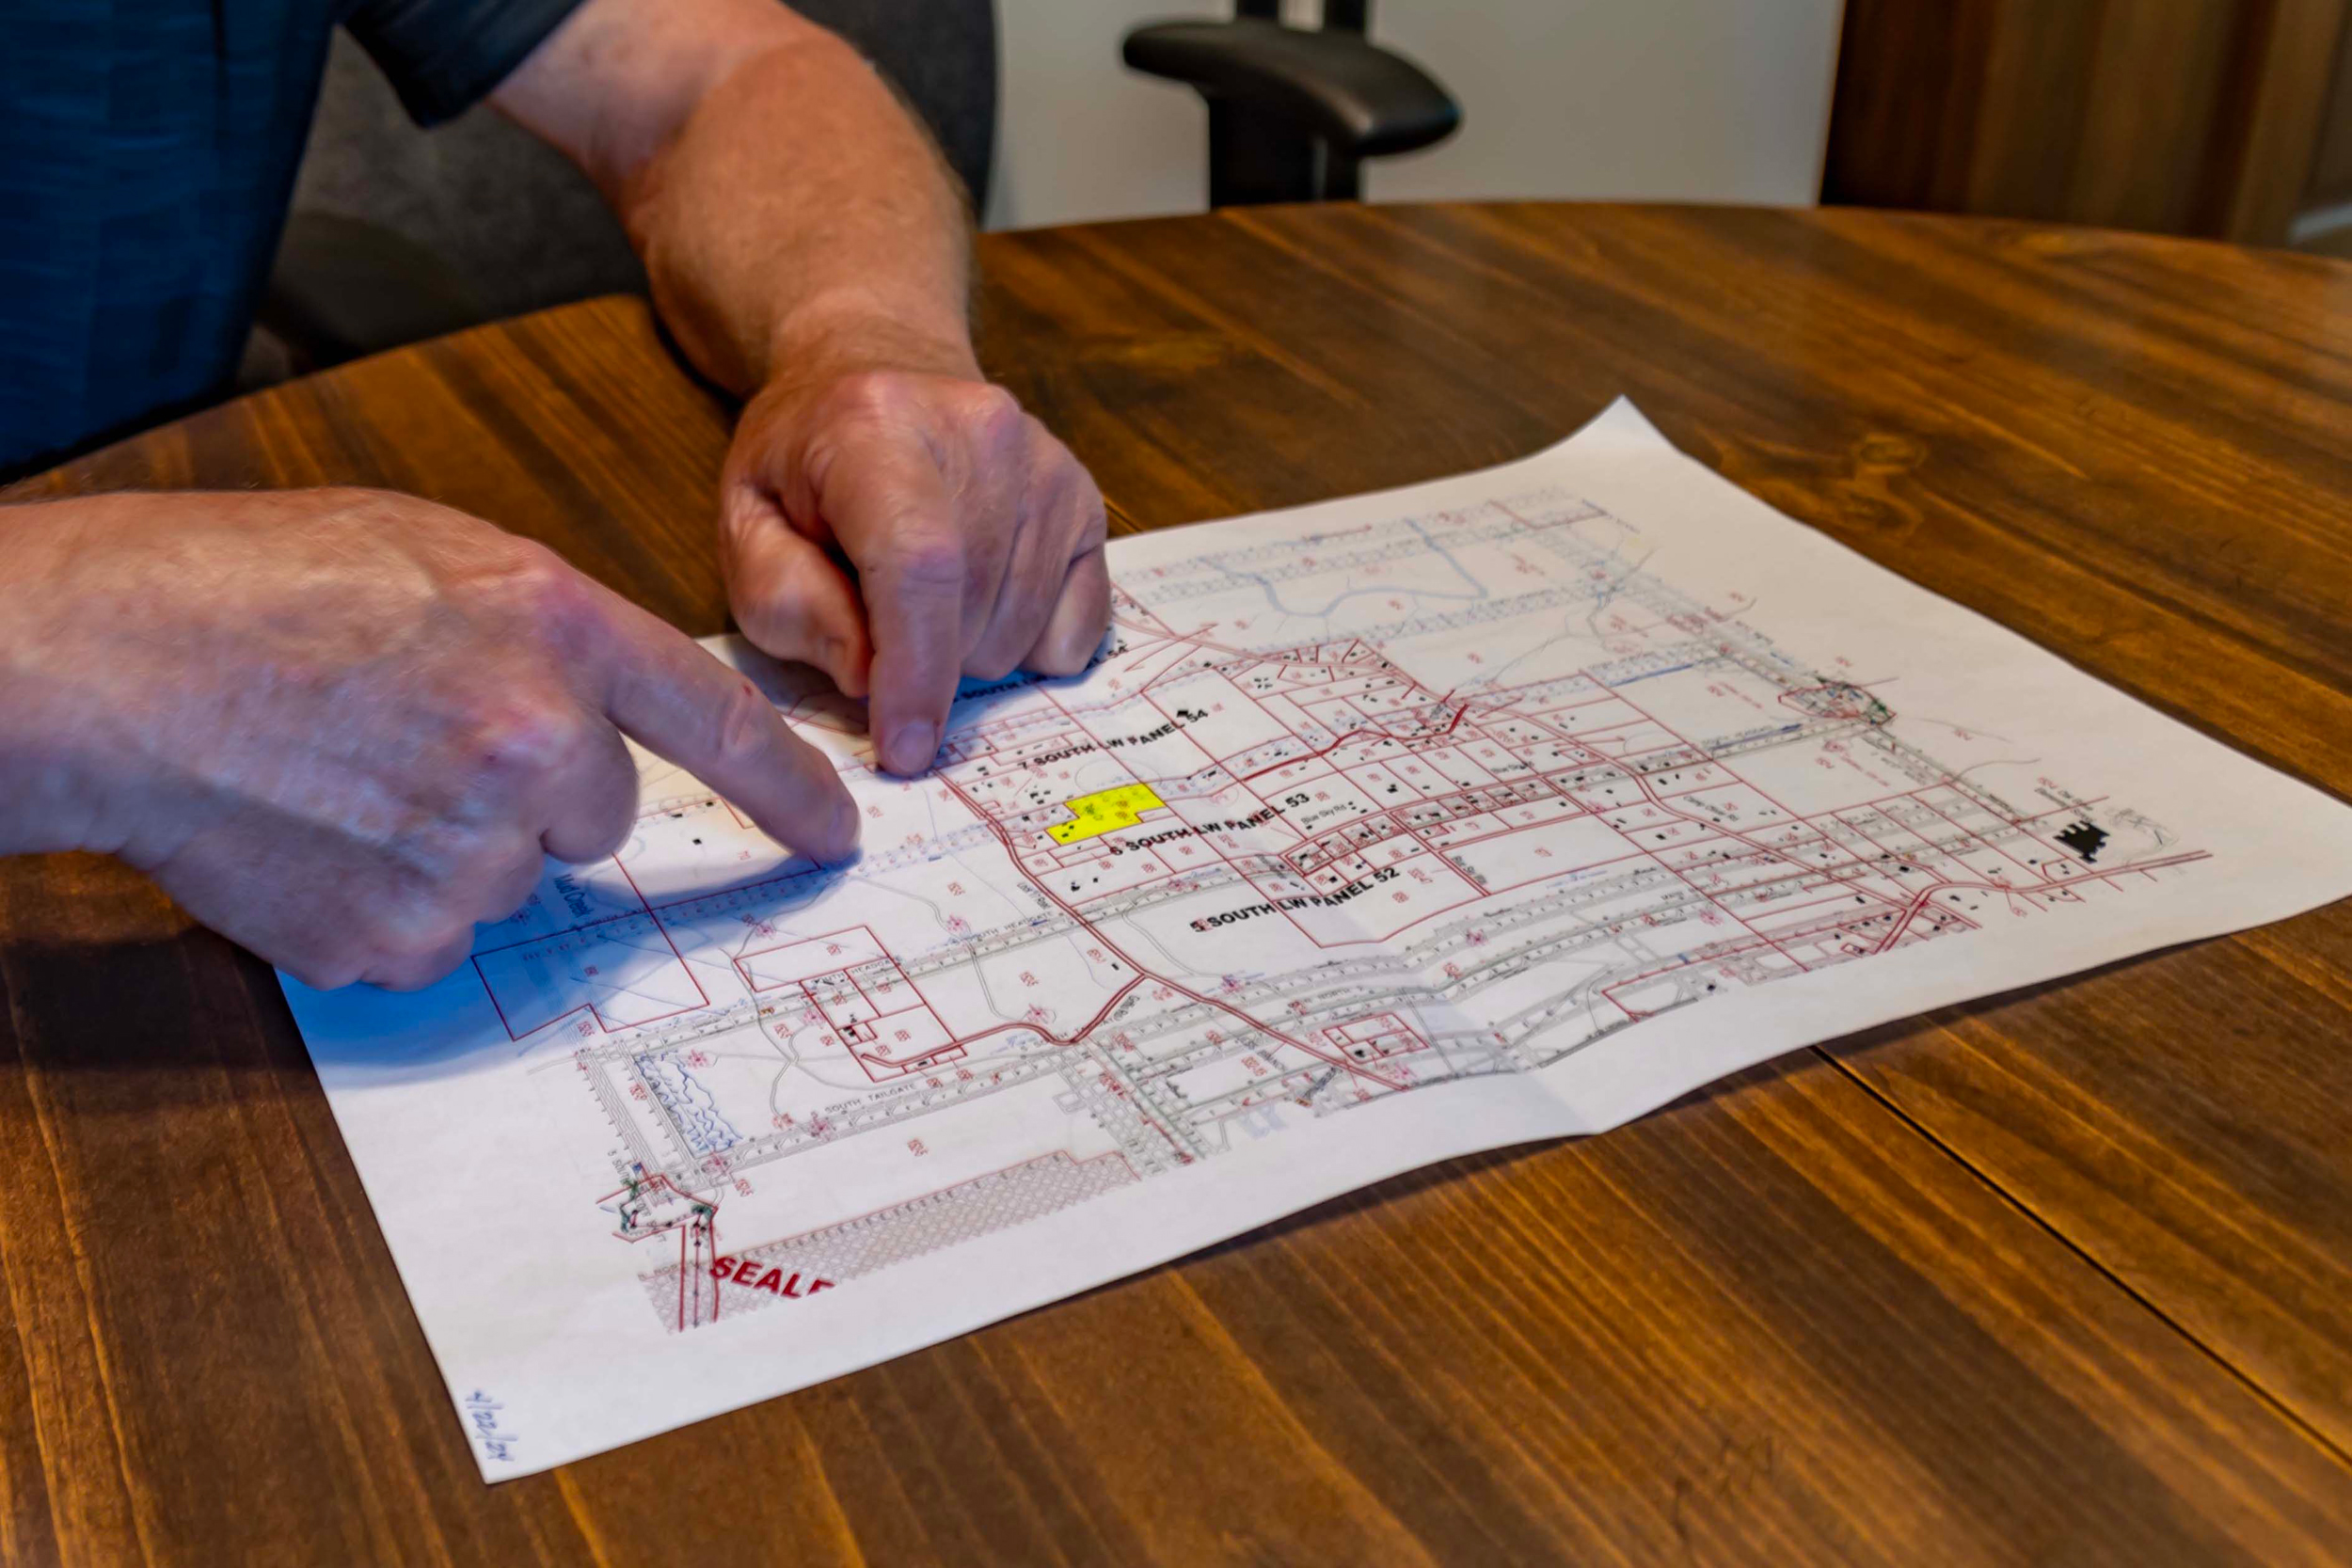 A Riley family member points to their property on a mining map. Credit: Lee Hedgepeth/Inside Climate News